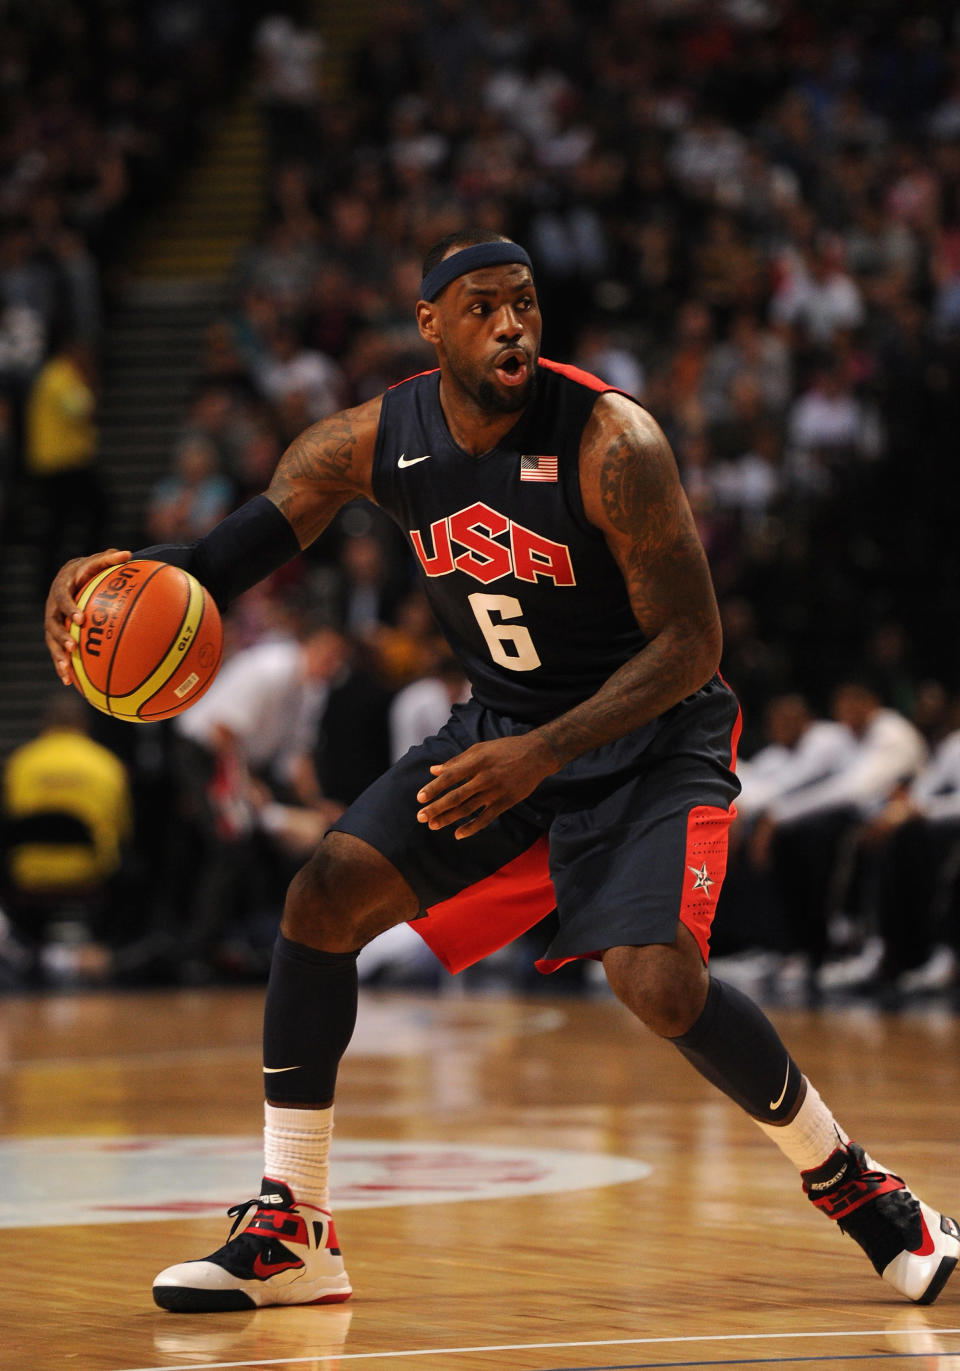 MANCHESTER, ENGLAND - JULY 19: USA player Lebron James in action during the Men's Exhibition Game between USA and Team GB at Manchester Arena on July 19, 2012 in Manchester, England.